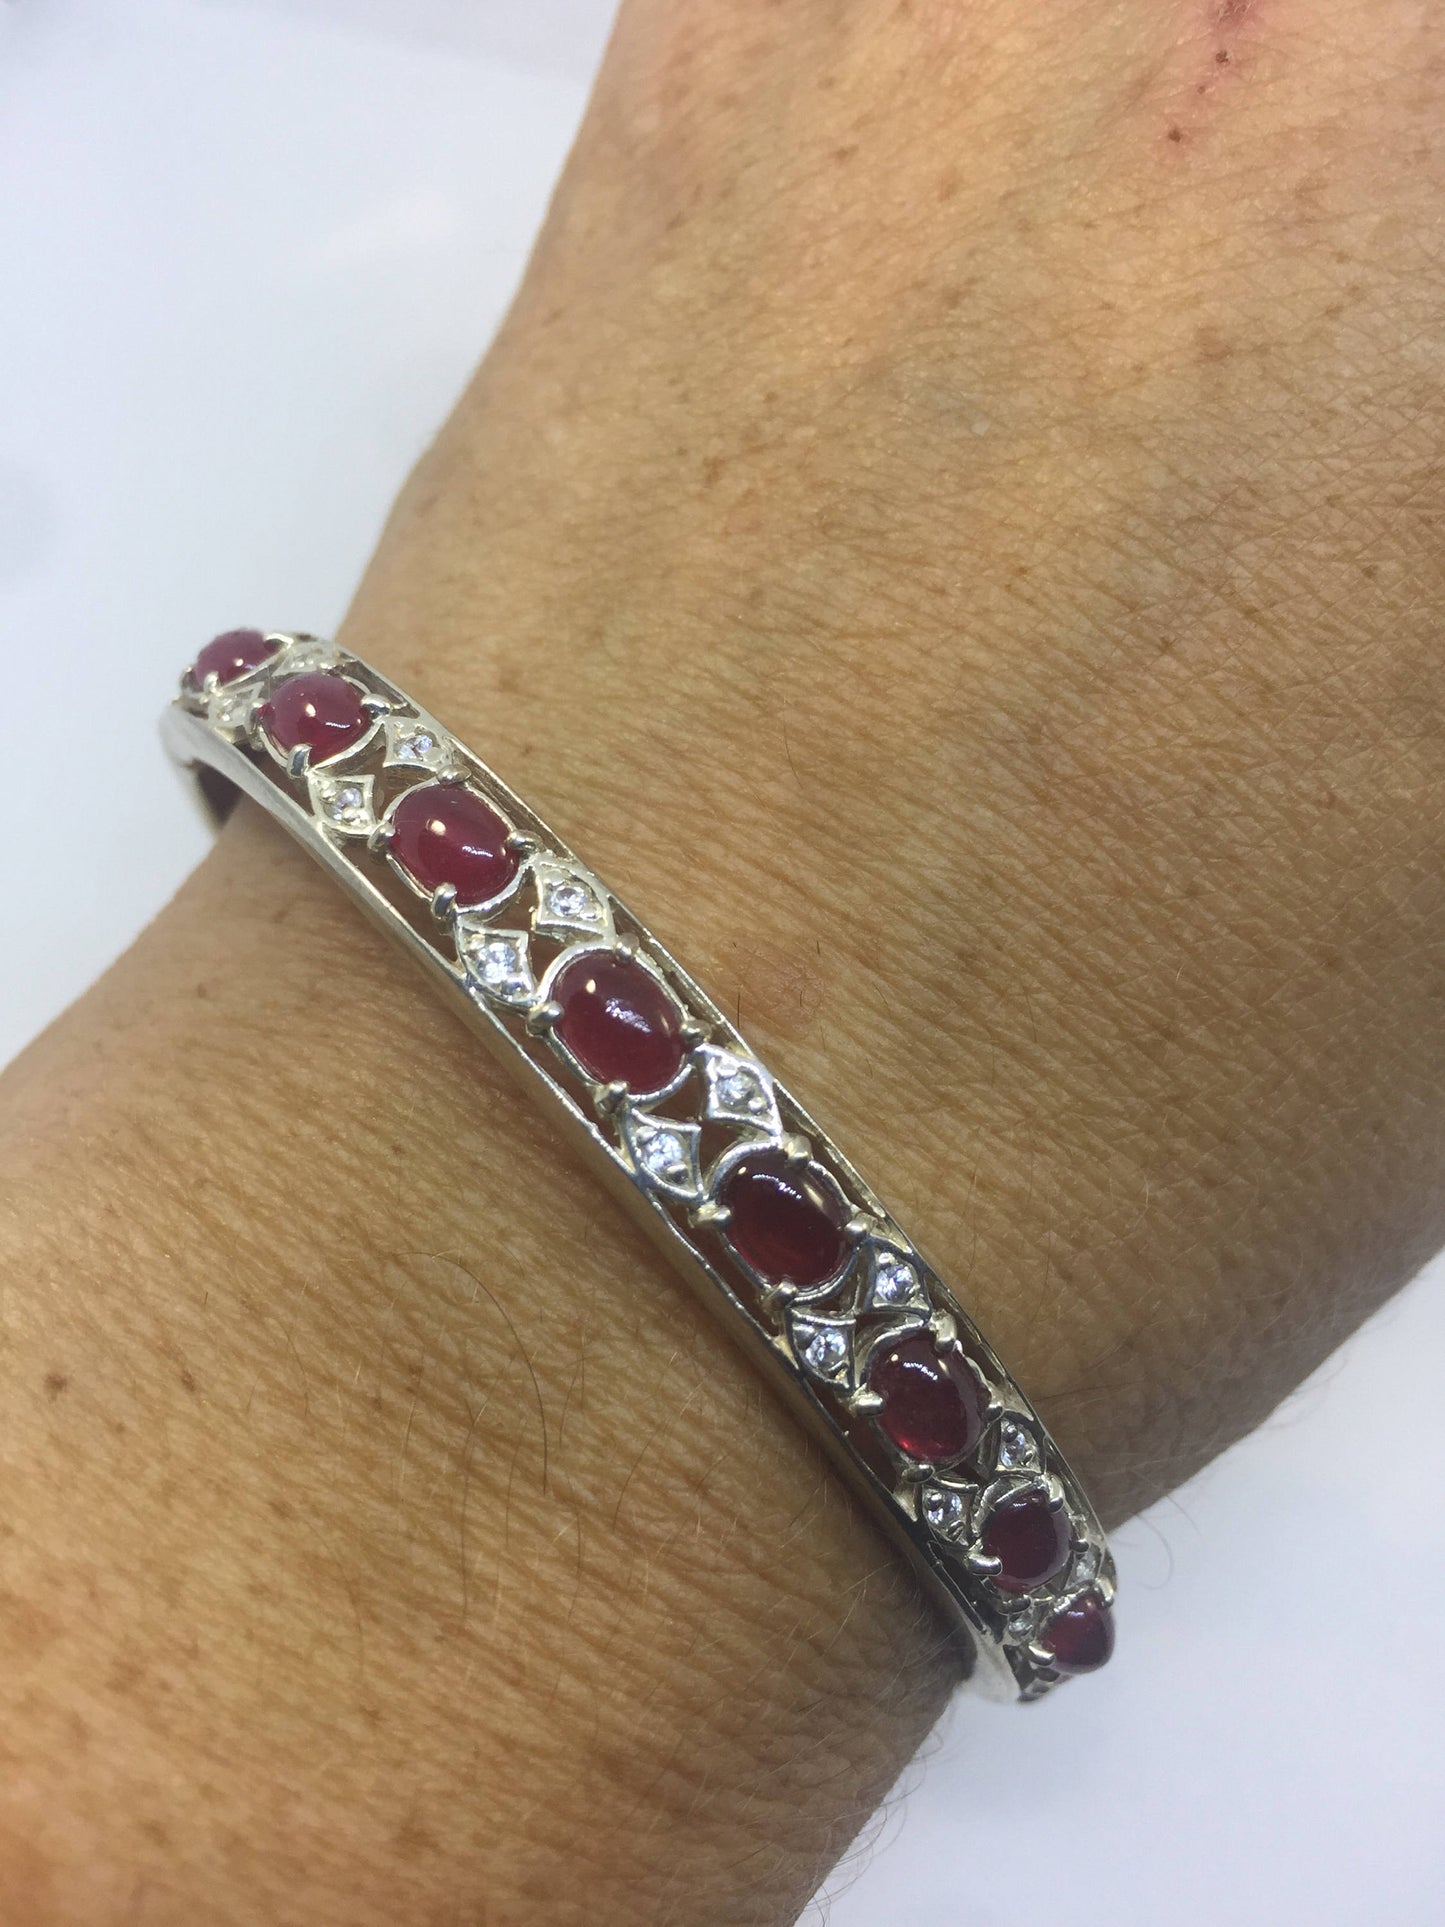 Handmade Genuine White Sapphire and Ruby in 925 Sterling Silver Bangle Bracelet